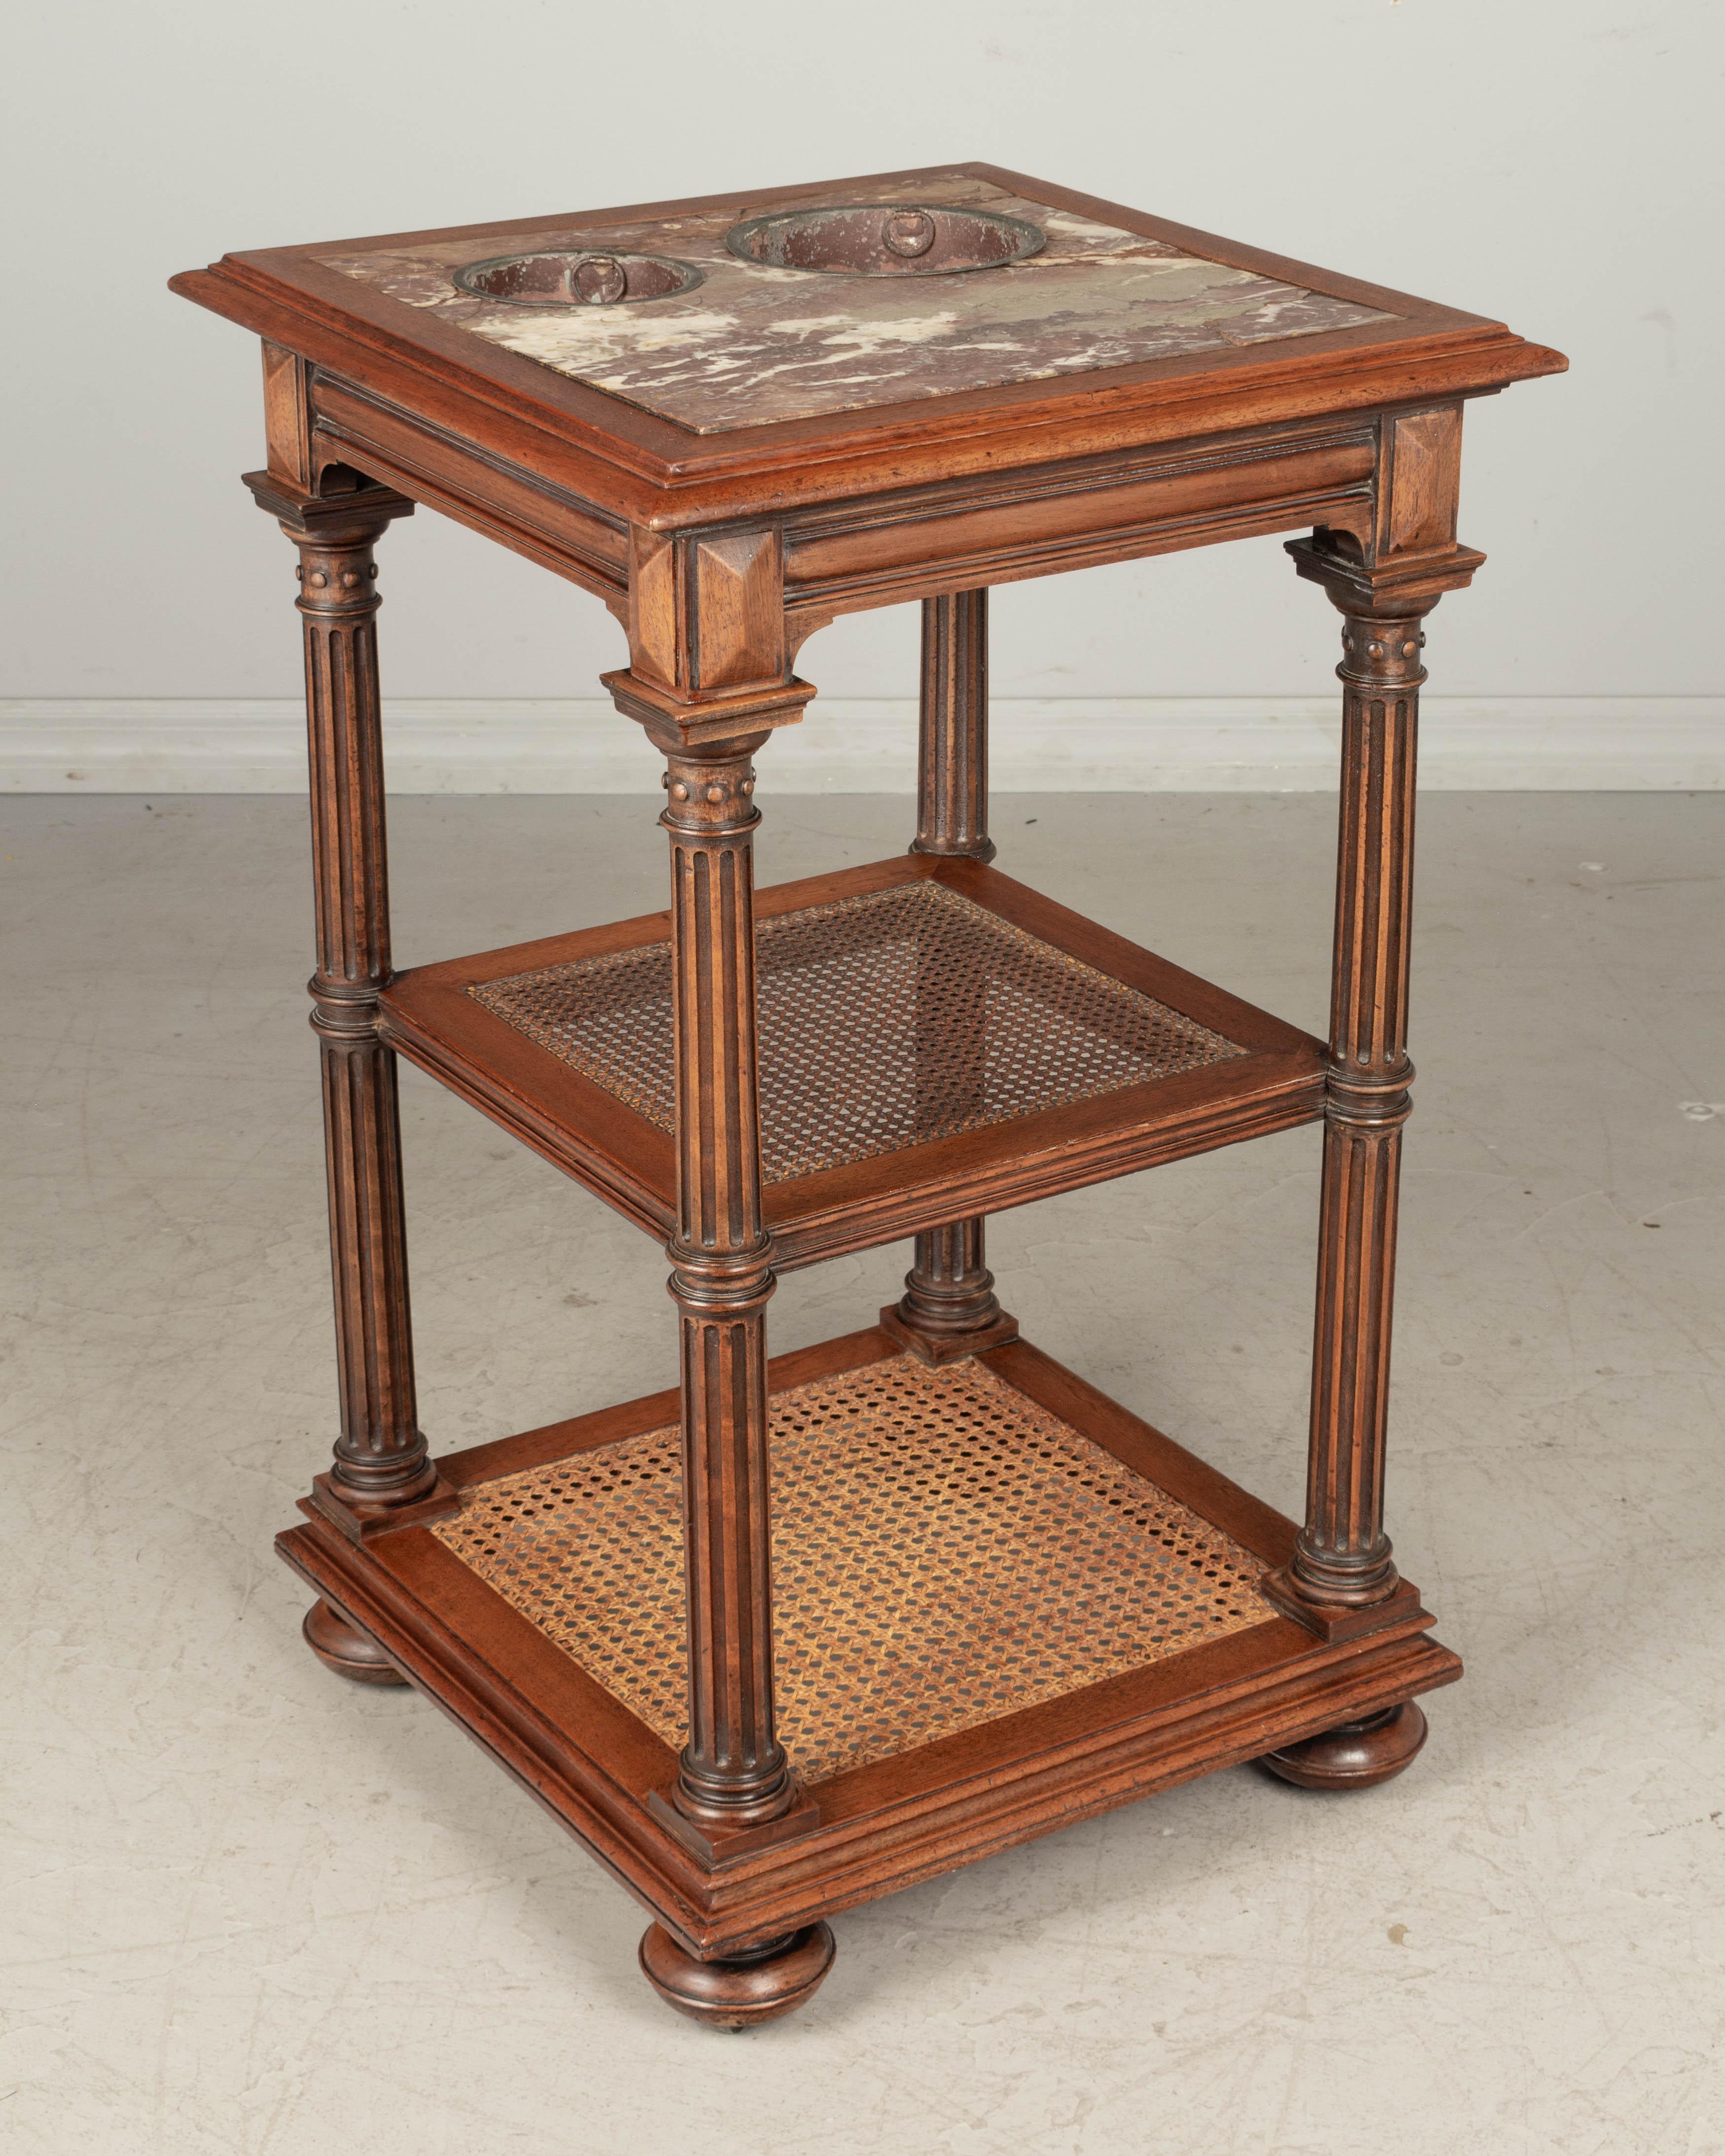 A 19th century Louis Philippe style French rafraichissoir, or side table with wine coolers, made of solid walnut with fluted turned legs and cane shelves. Red veined marble top has two wine bucket inserts. Marble top is repaired. Waxed patina. These